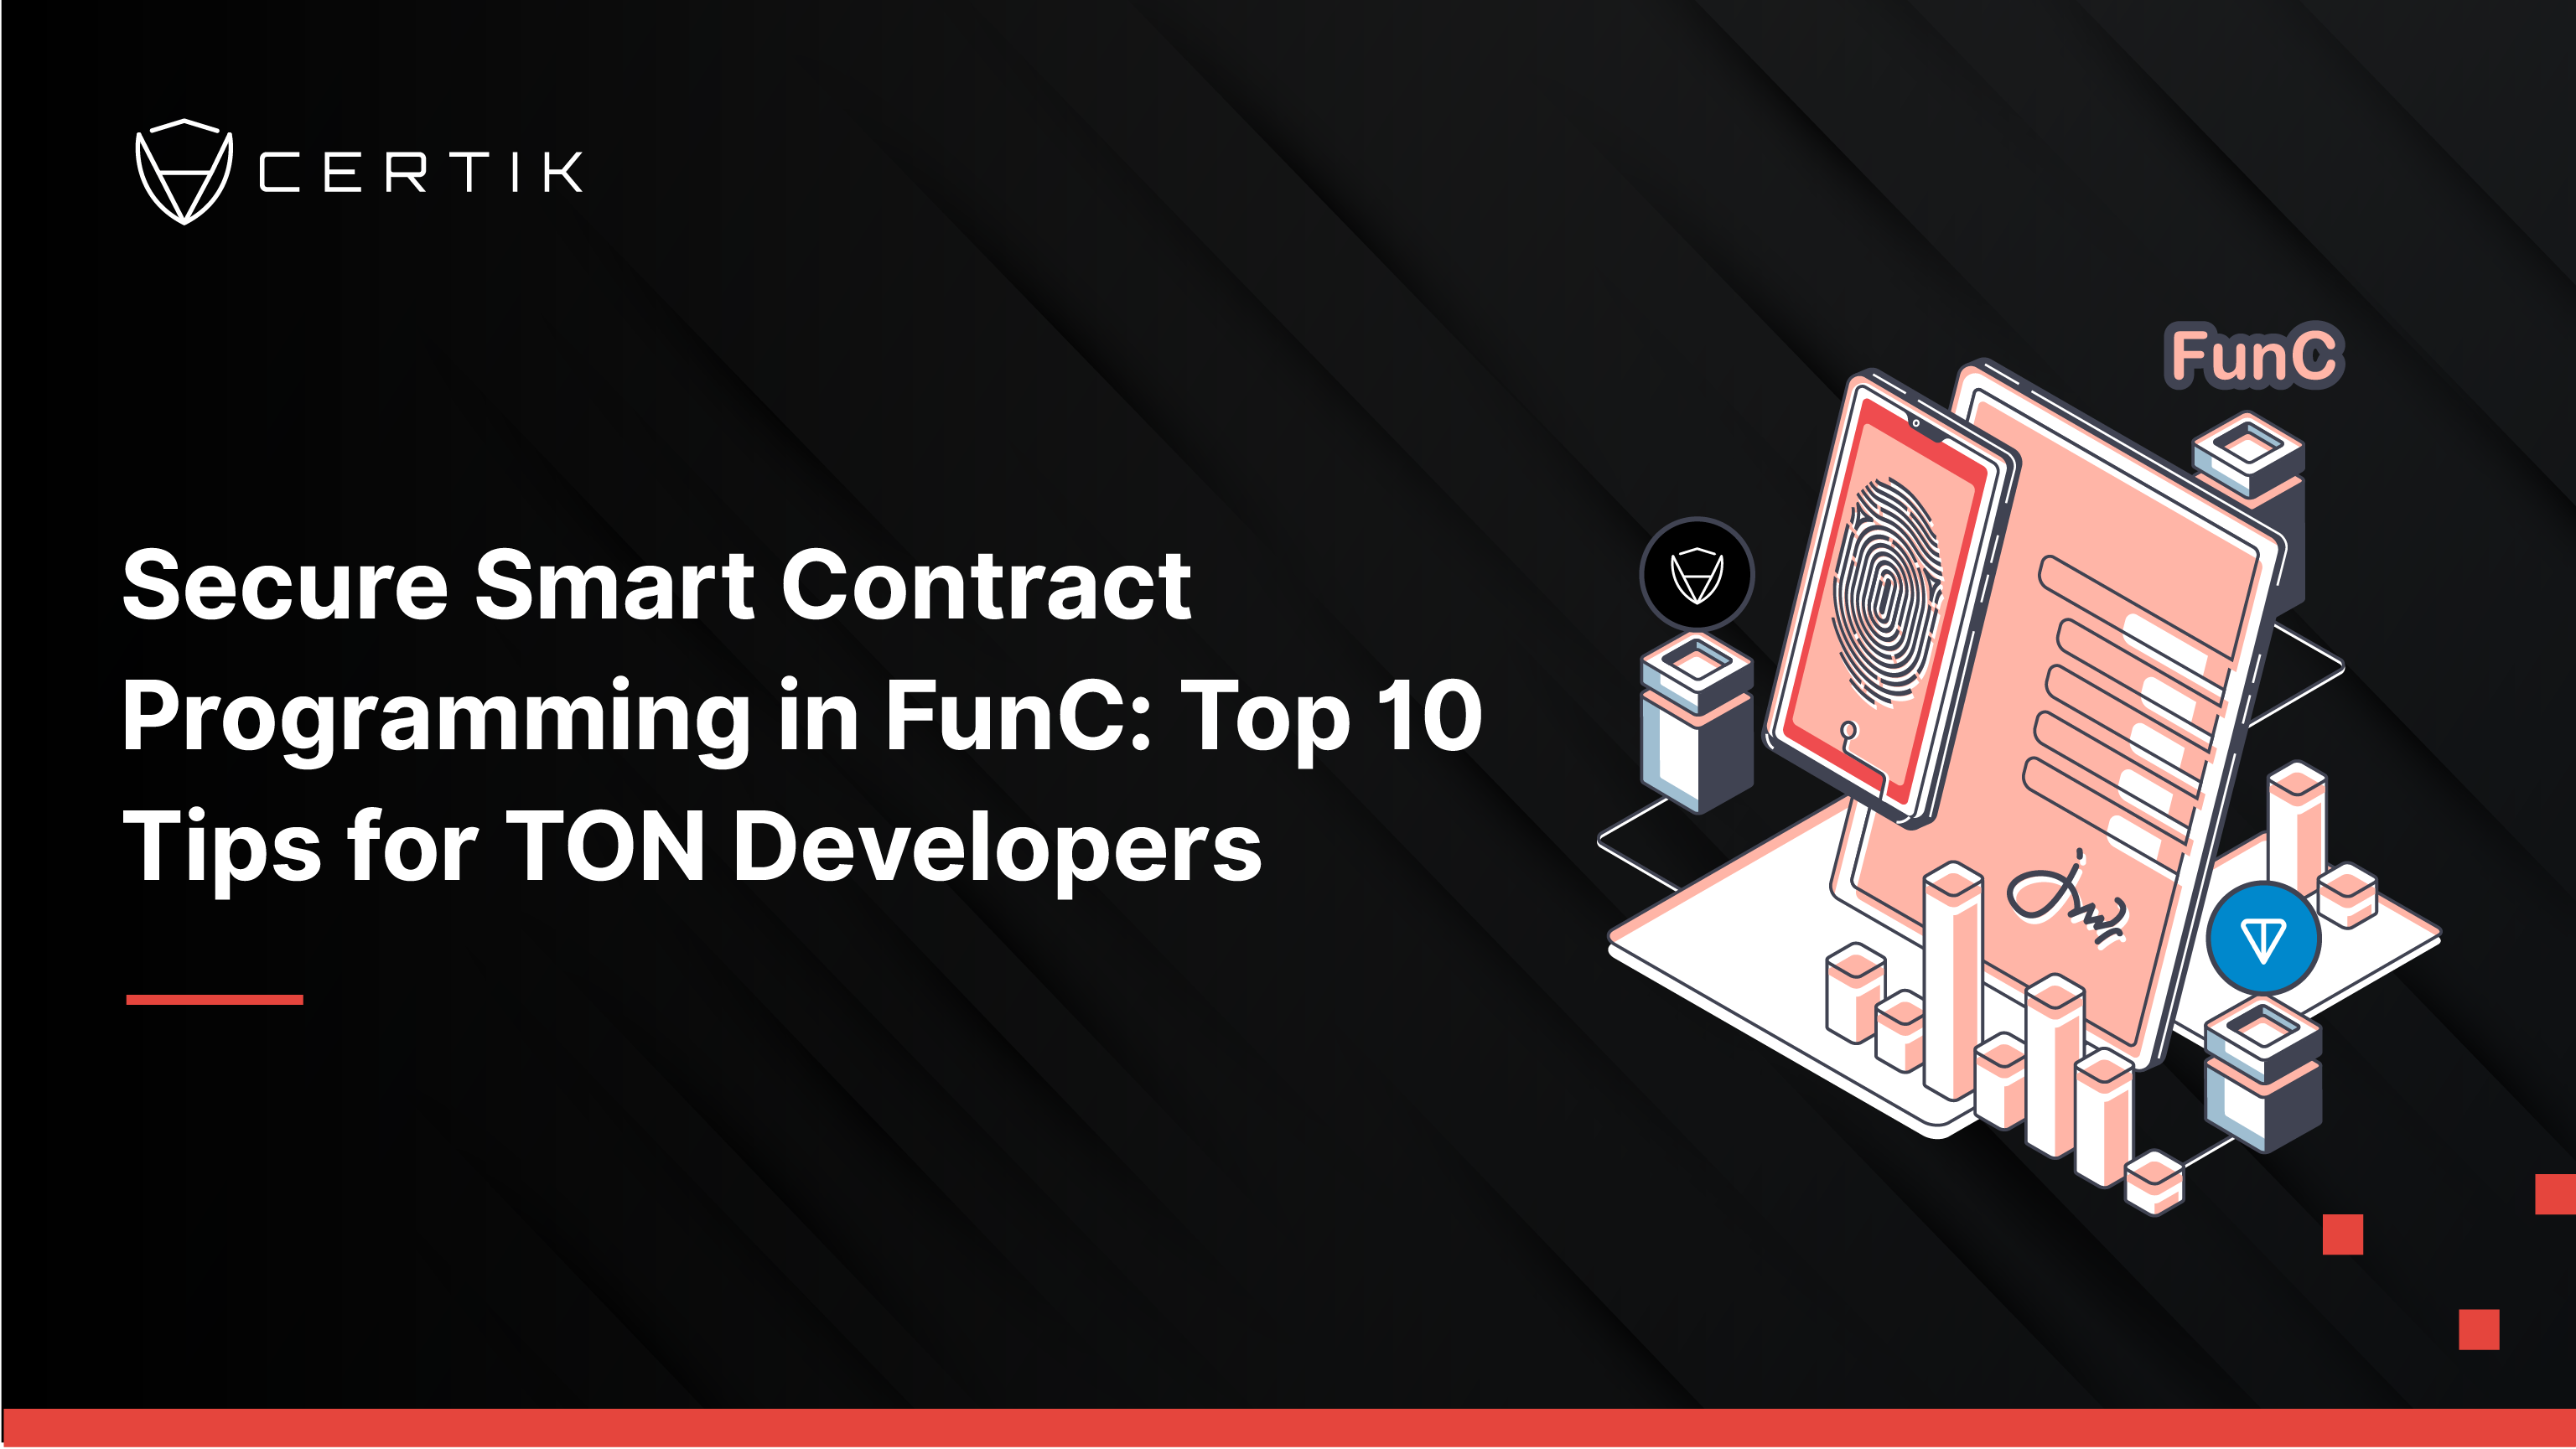 Secure Smart Contract Programming in FunC: Top 10 Tips for TON Developers